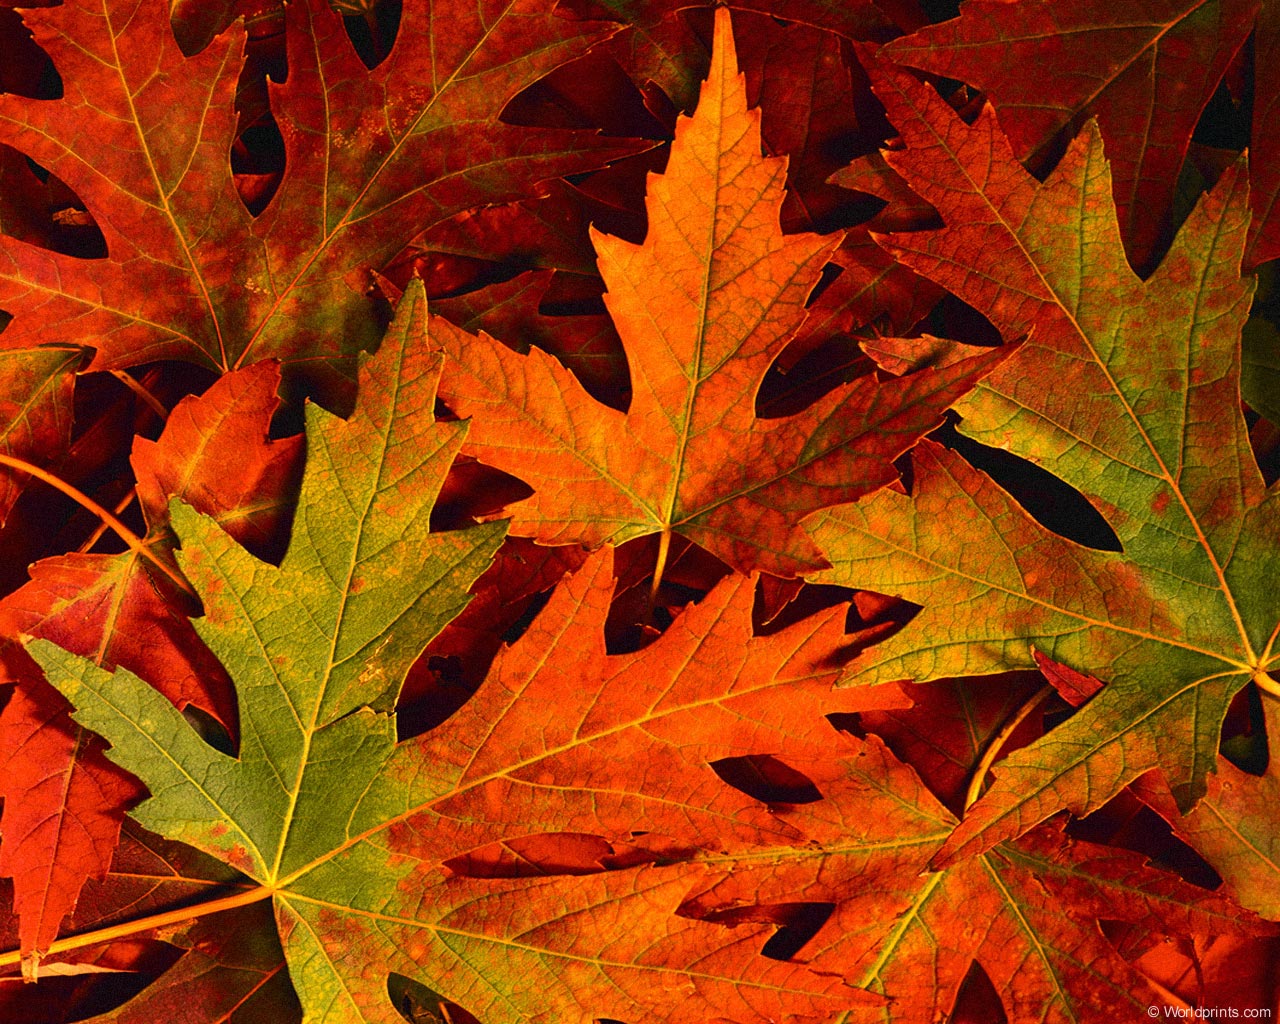 fall leaves   Autumn Photography Desktop Wallpapers 55759 Views